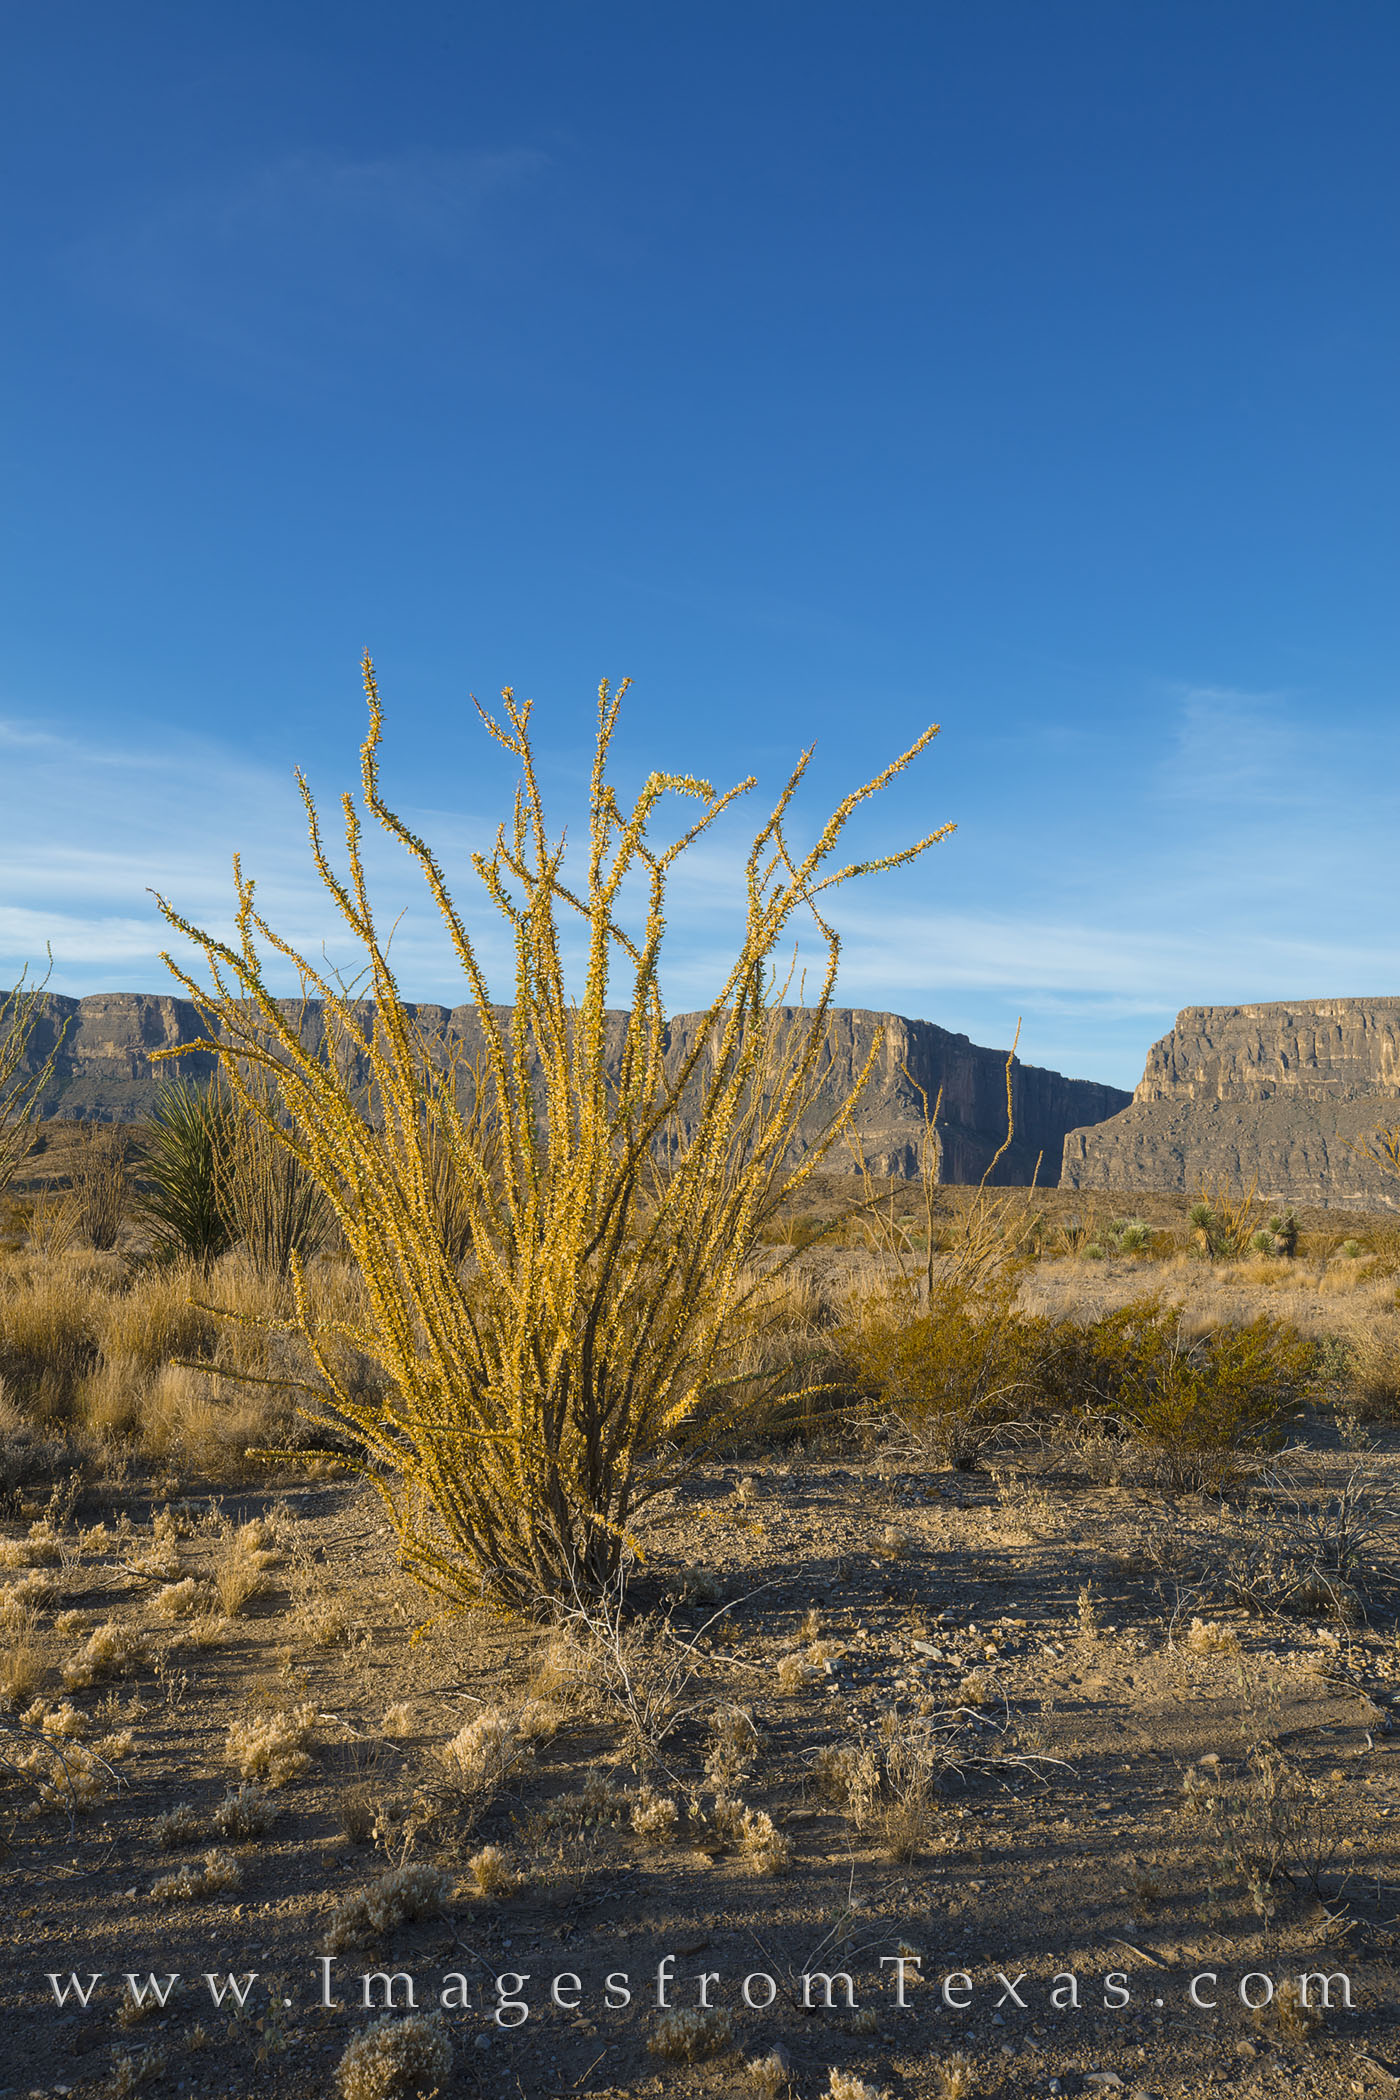 As one of the most well-known places in Big Bend National Park, Santa Elena Canyon is a sight to see. This November photograph...